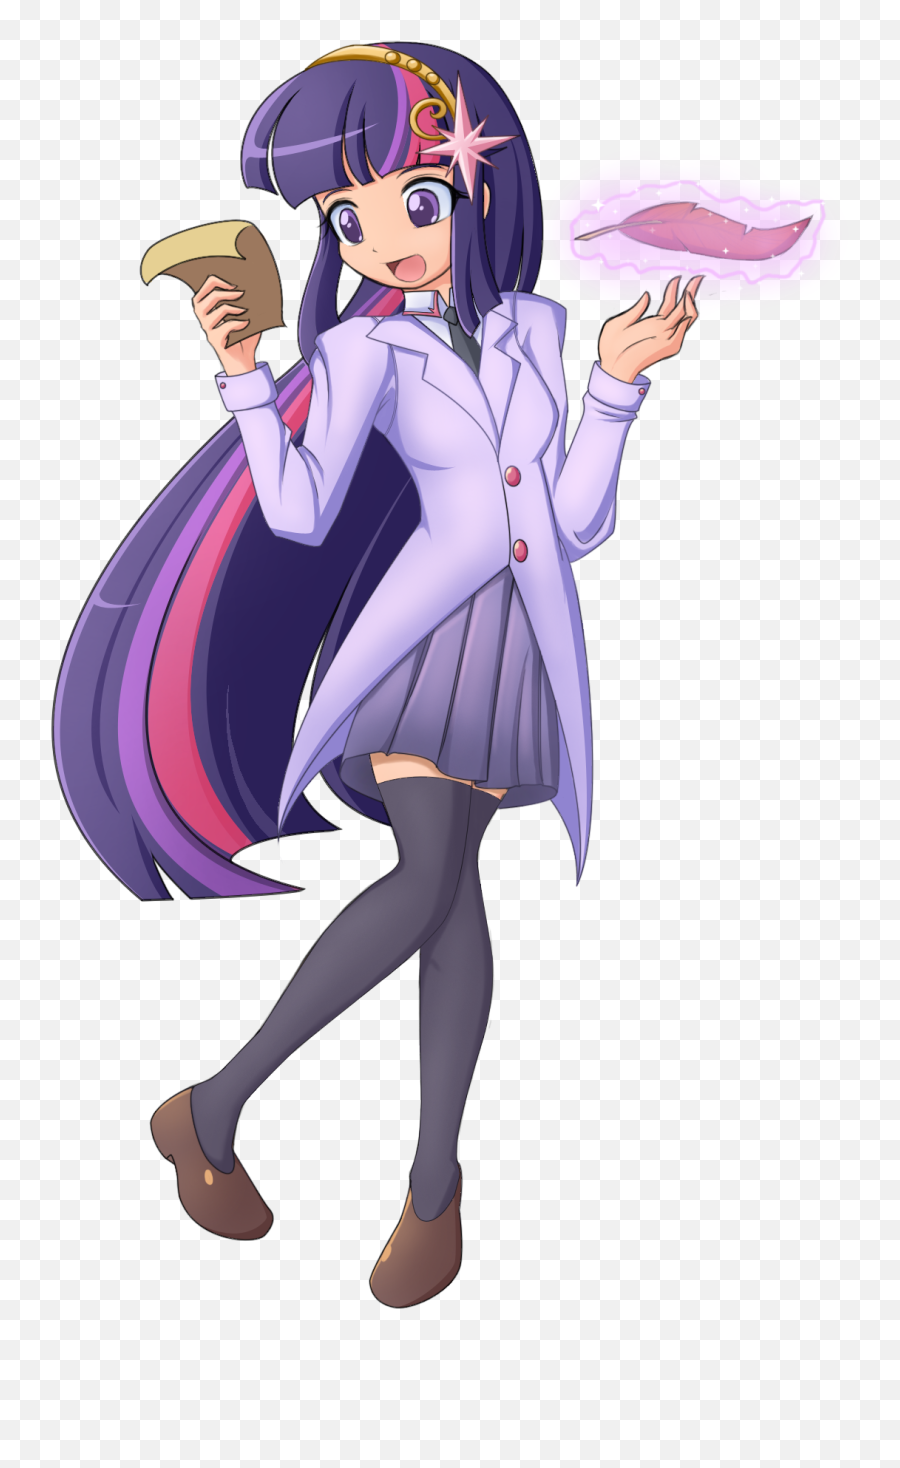 Twilight Sparkle Anime Human Png Image My Little Pony Human Twilight Sparkle Anime Anime Sparkle Png Free Transparent Png Images Pngaaa Com